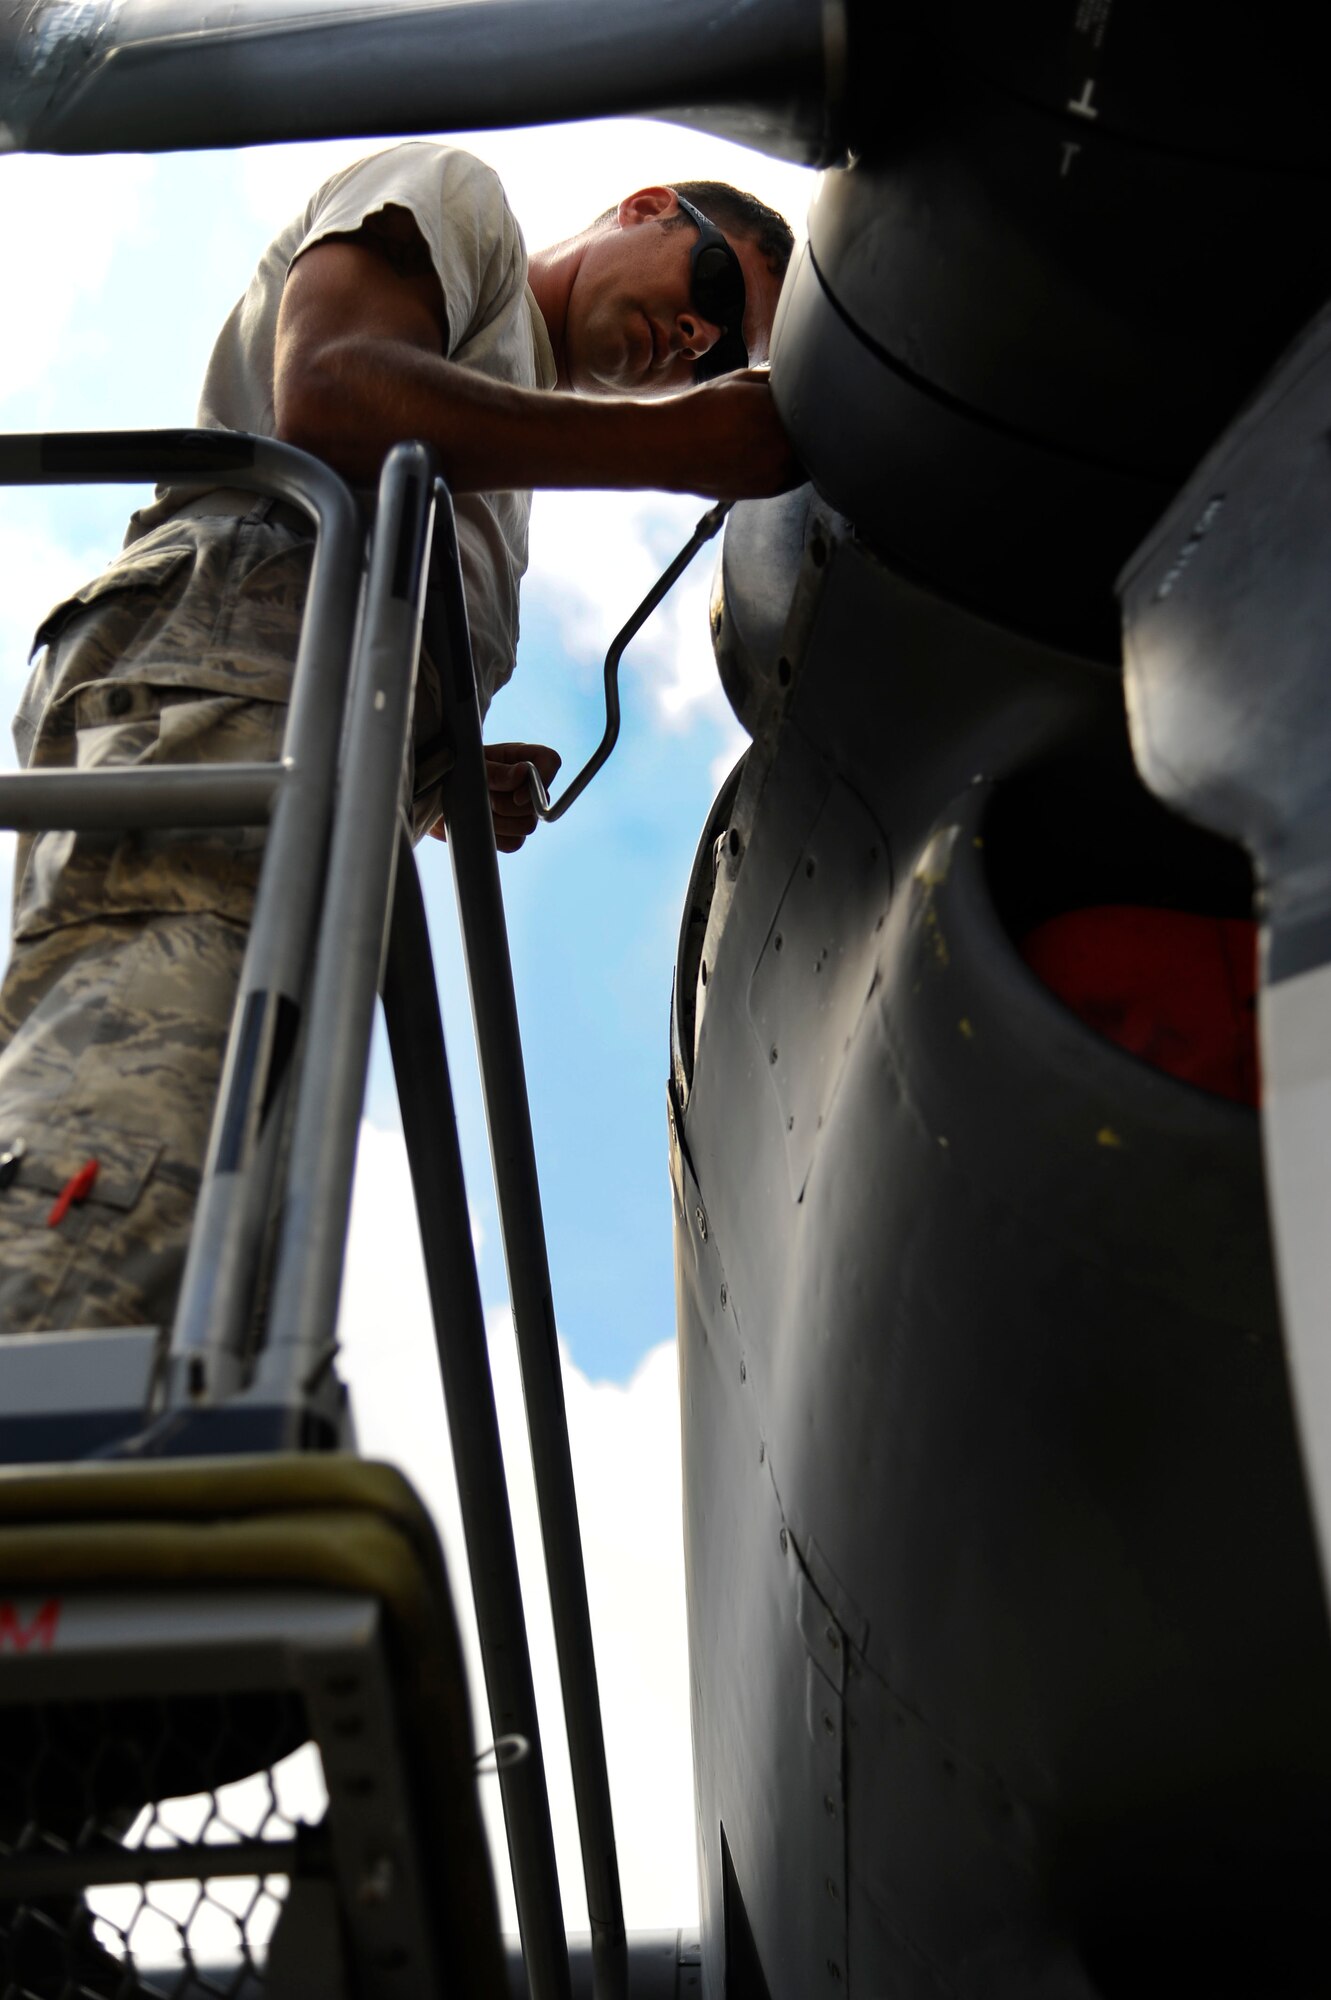 U.S. Air Force Staff Sgt. Keith Collins, 1st Special Operations Maintenance Squadron aerospace propulsion journeyman, works on an MC-130H Combat Talon II engine on the flightline at Eglin, Fla., July 25, 2011.  1st SOMXS maintainers spend countless hours before and after departure to ensure all aircraft can perform at an optimum level. (U.S. Air Force photo by Airman Gustavo Castillo)